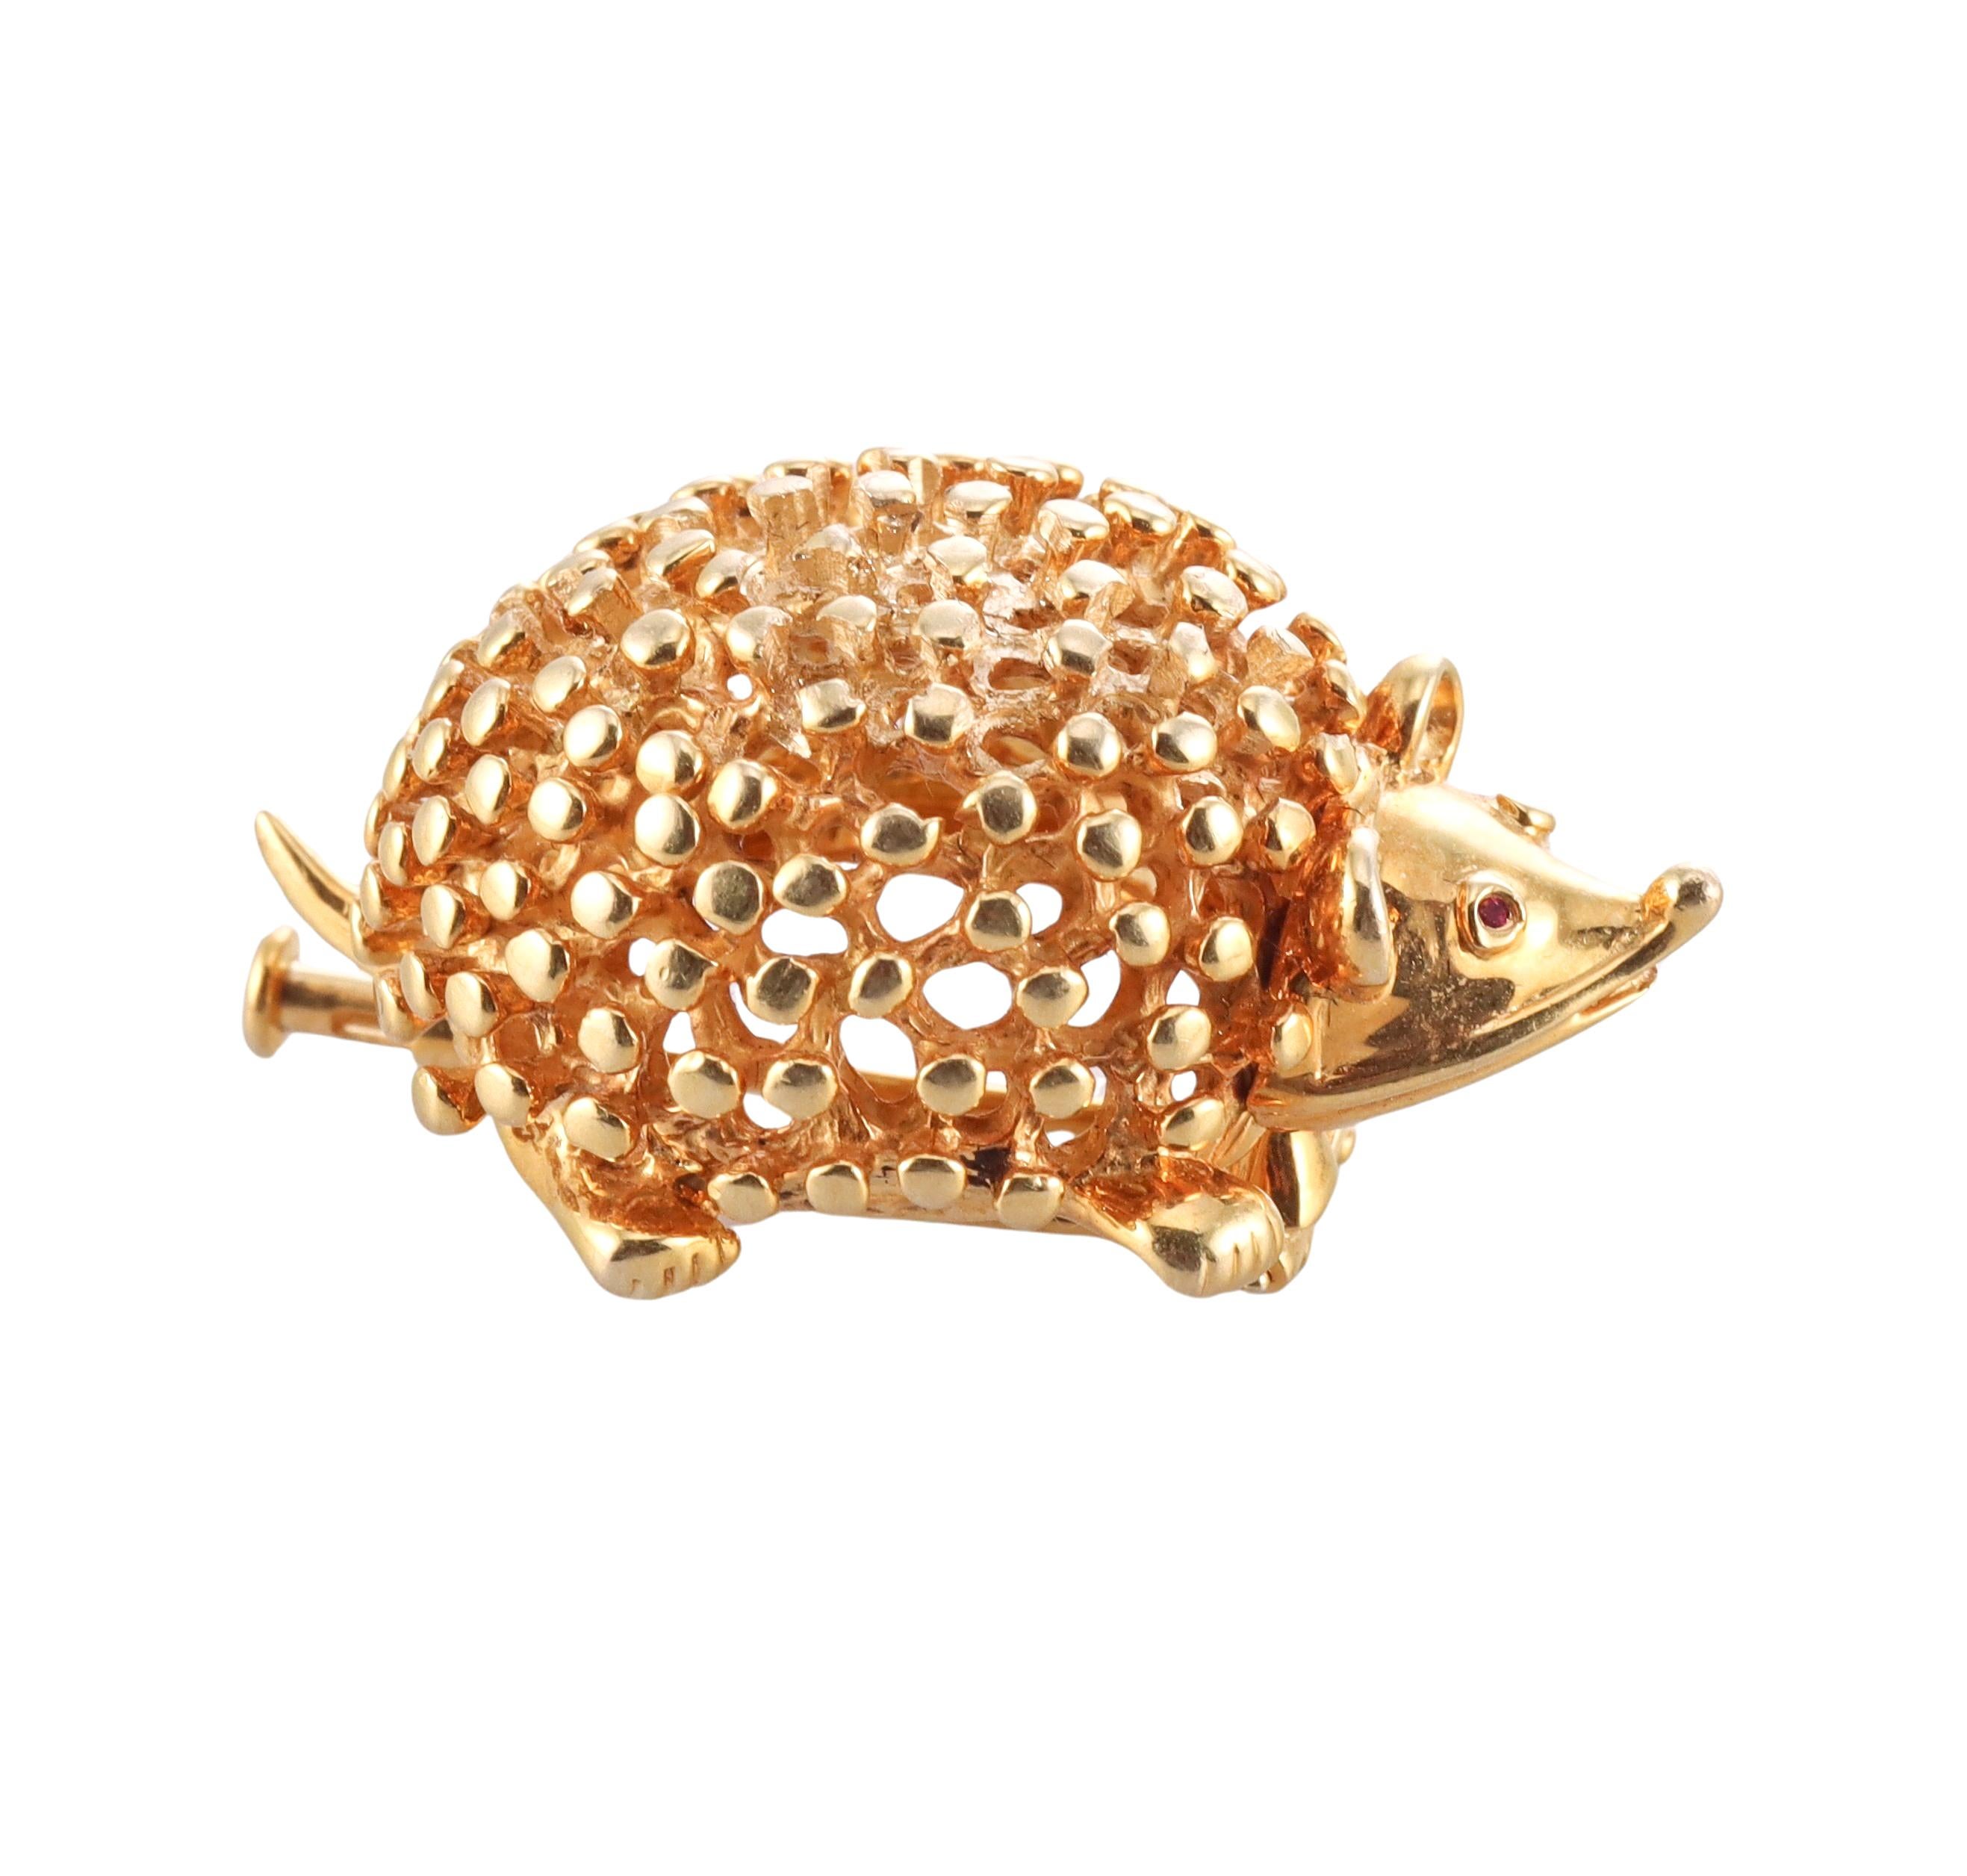 Adorable 18k yellow gold hedgehog brooch , designed by Jean Schlumberger for Tiffany & Co. Set with tiny ruby eyes. The brooch measures 1.25